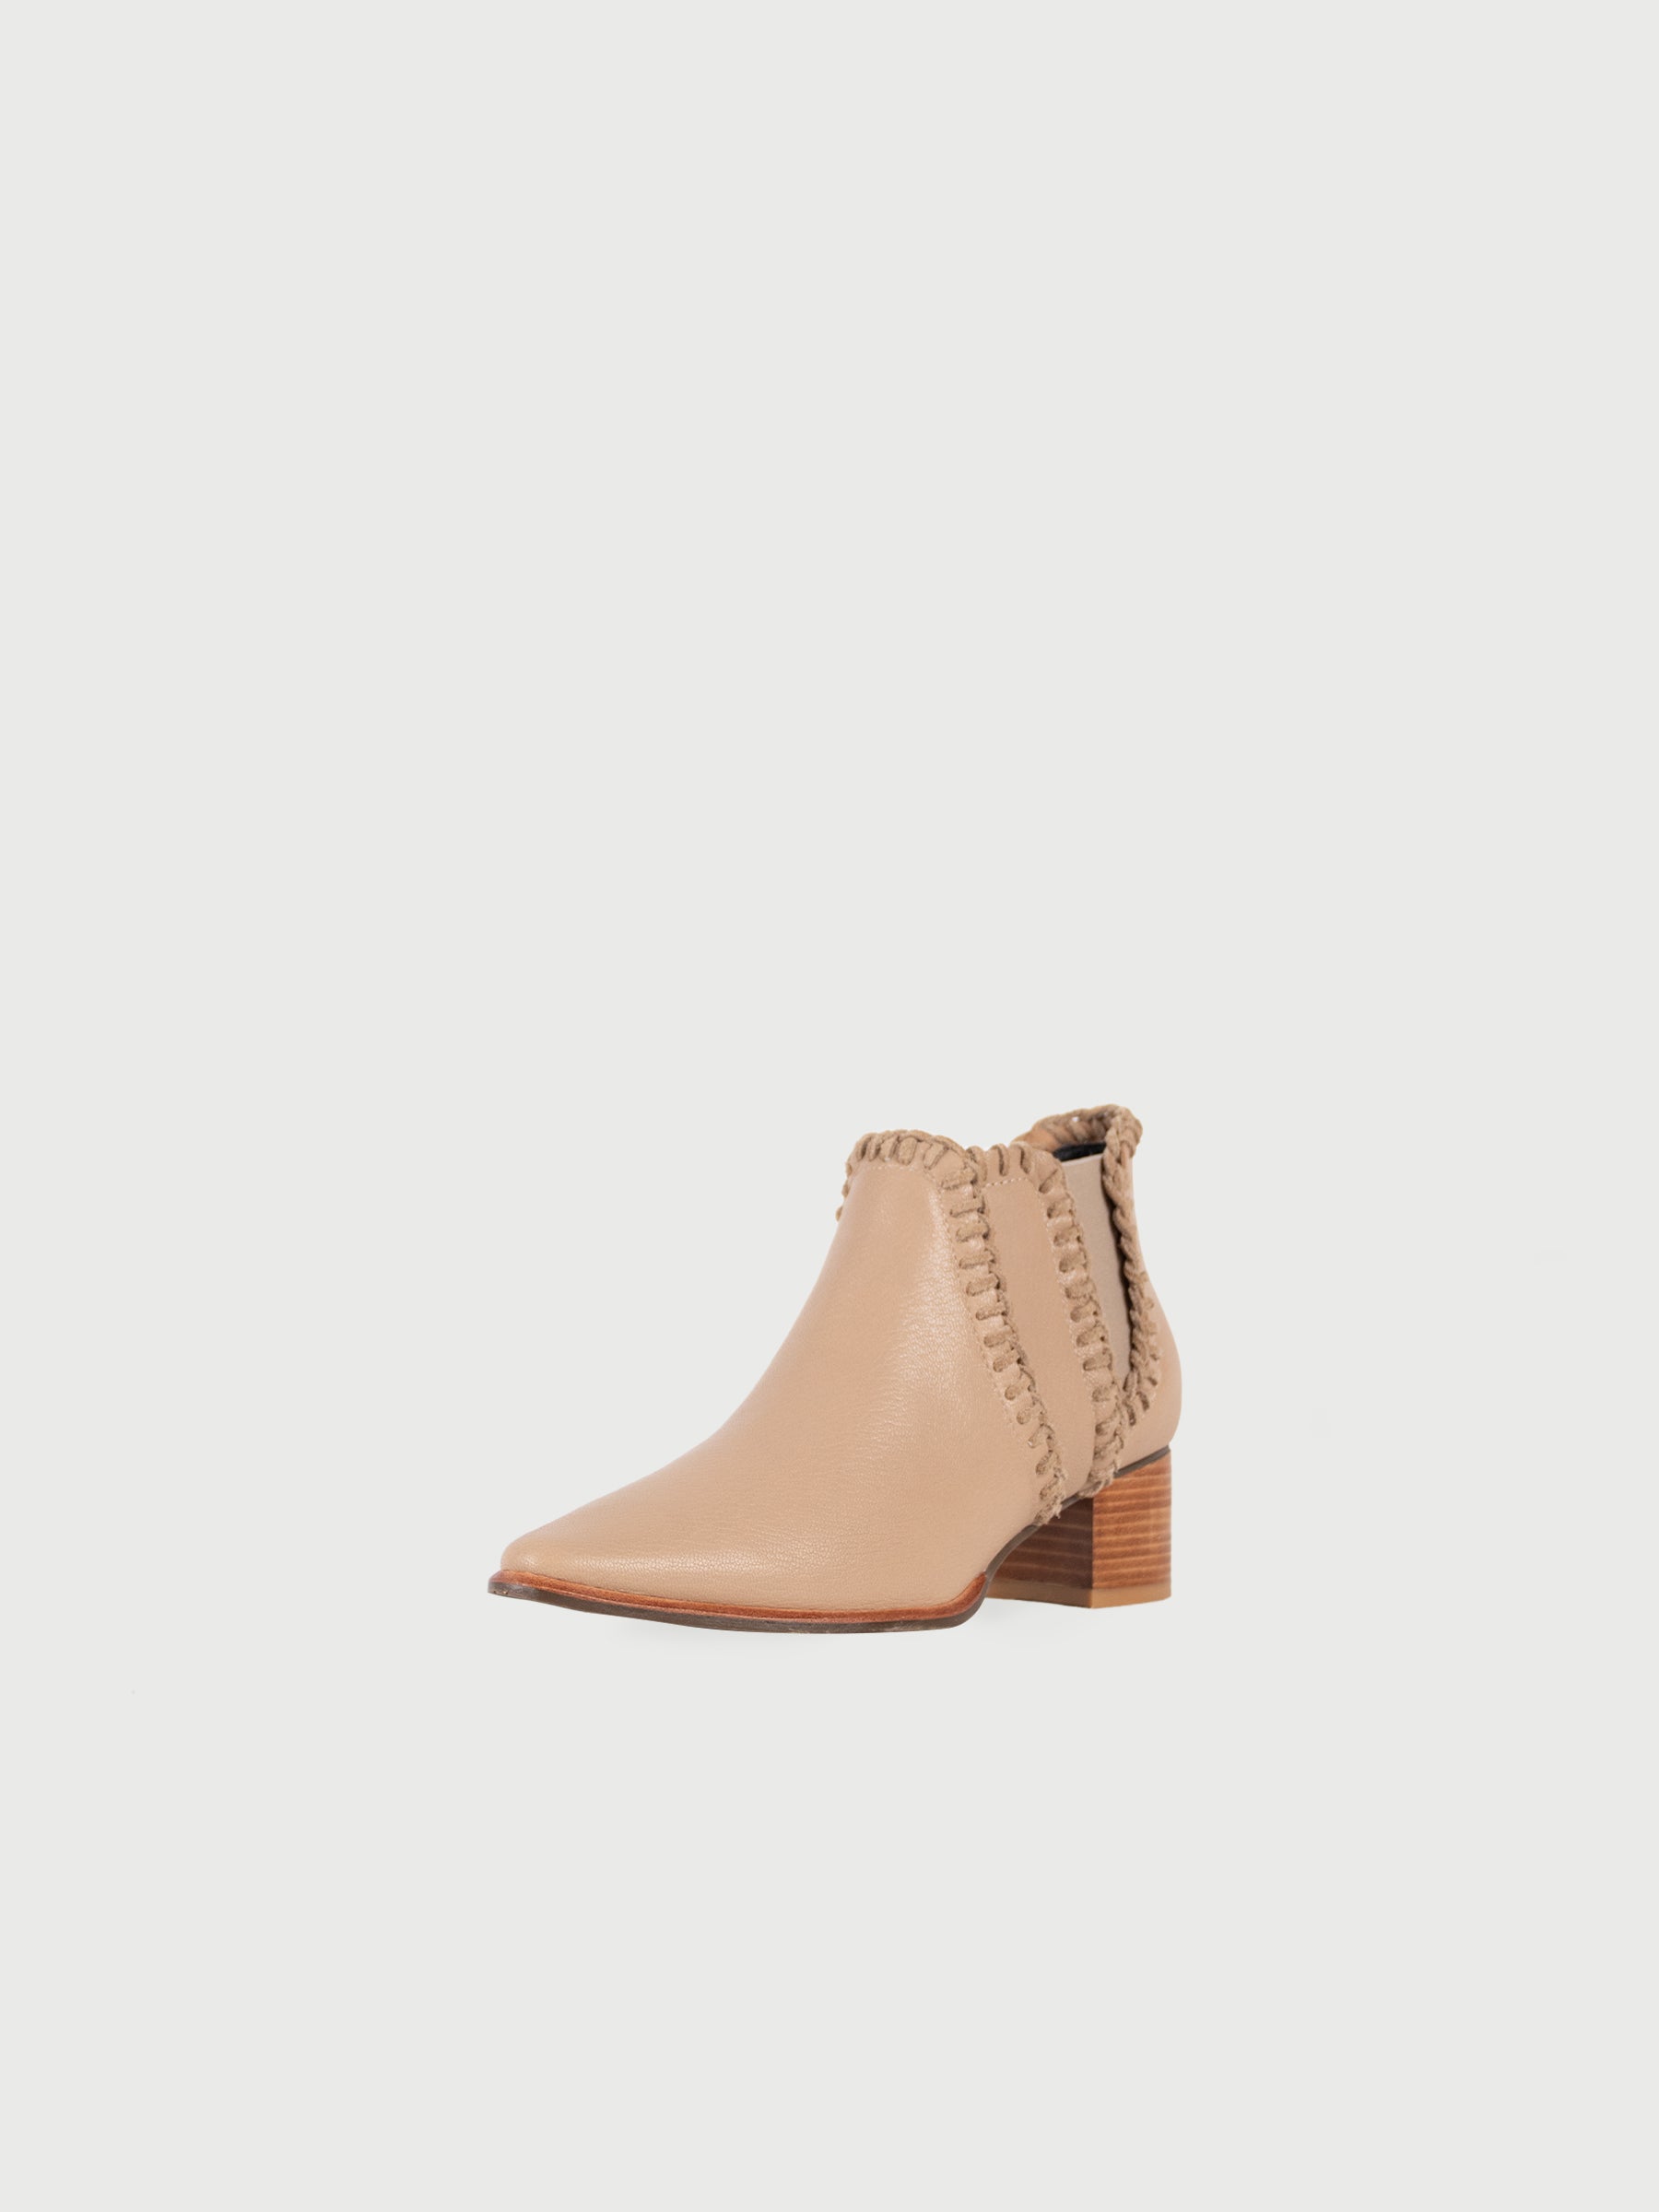 Blanket Stitch Block Heel Leather Ankle Boots